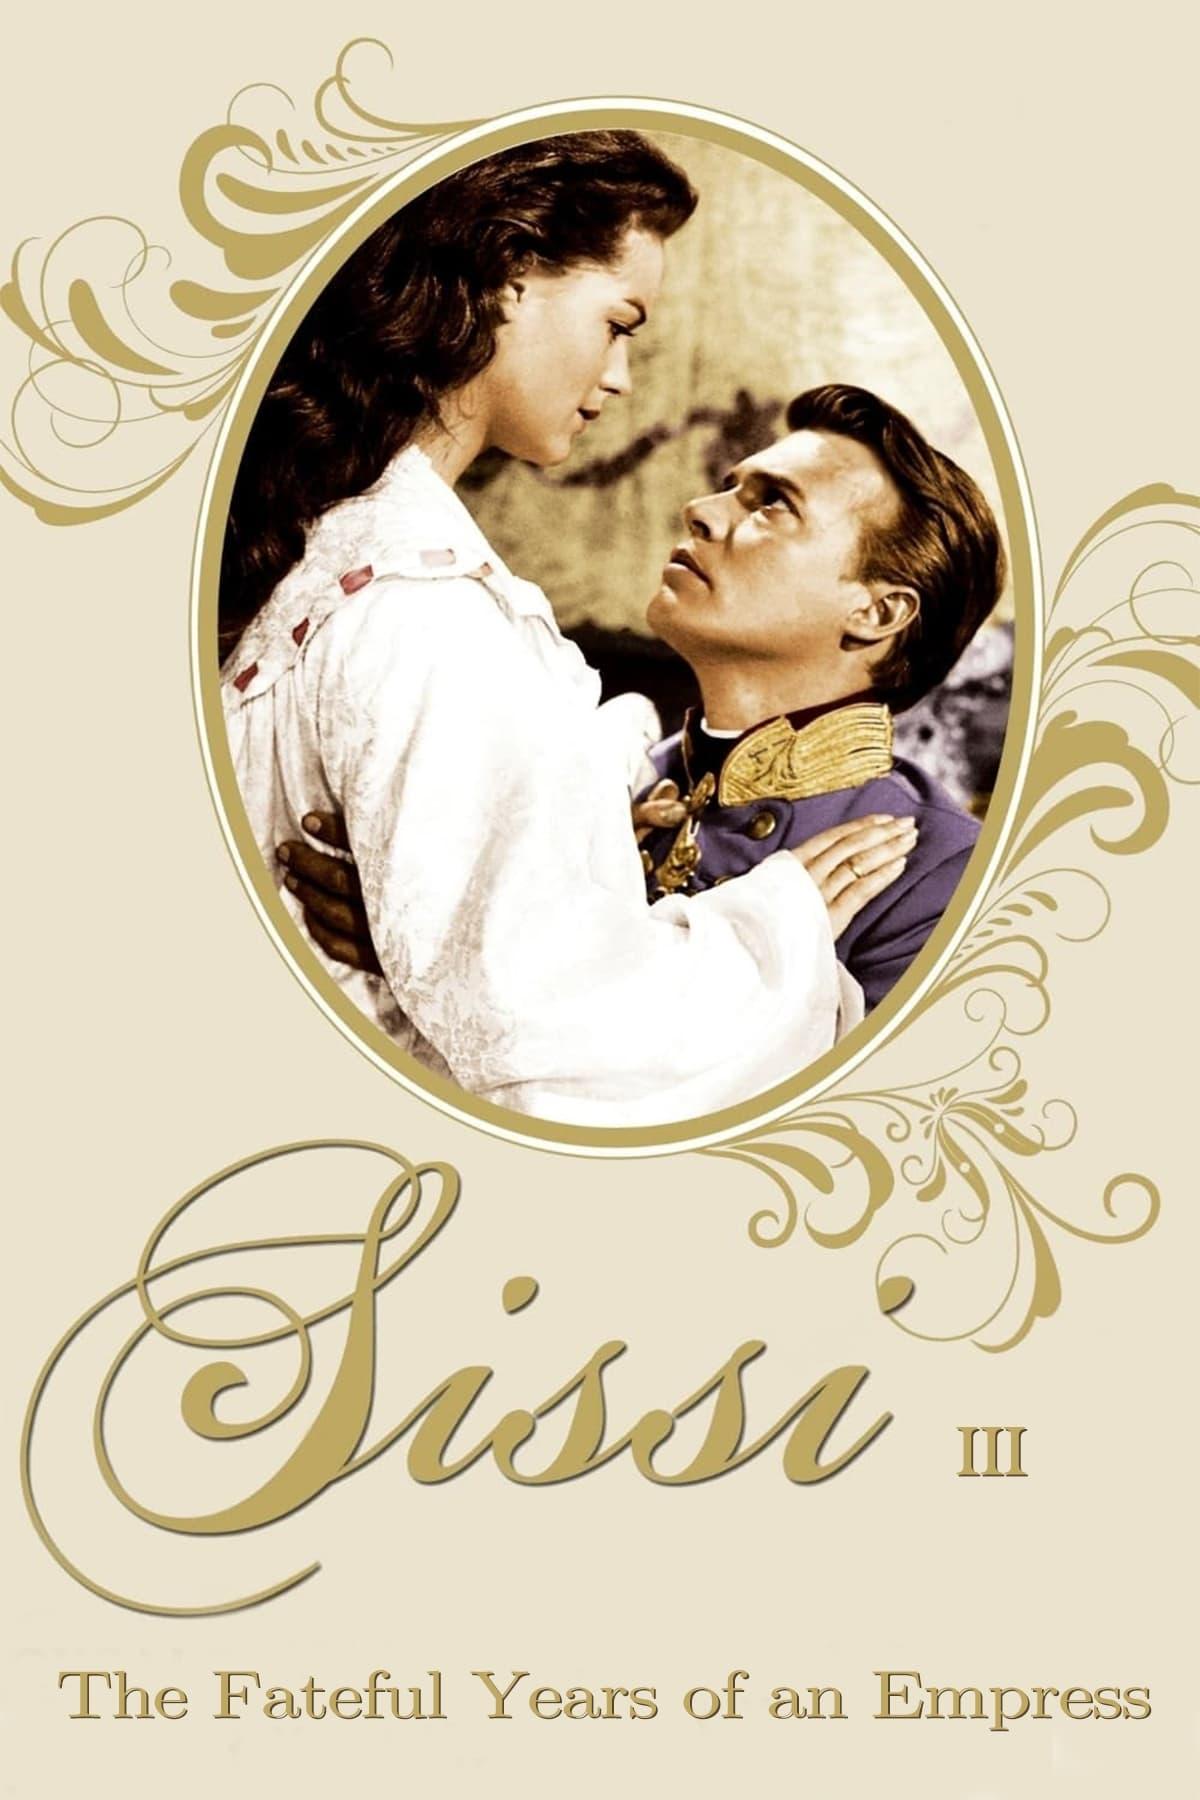 Sissi: The Fateful Years of an Empress poster